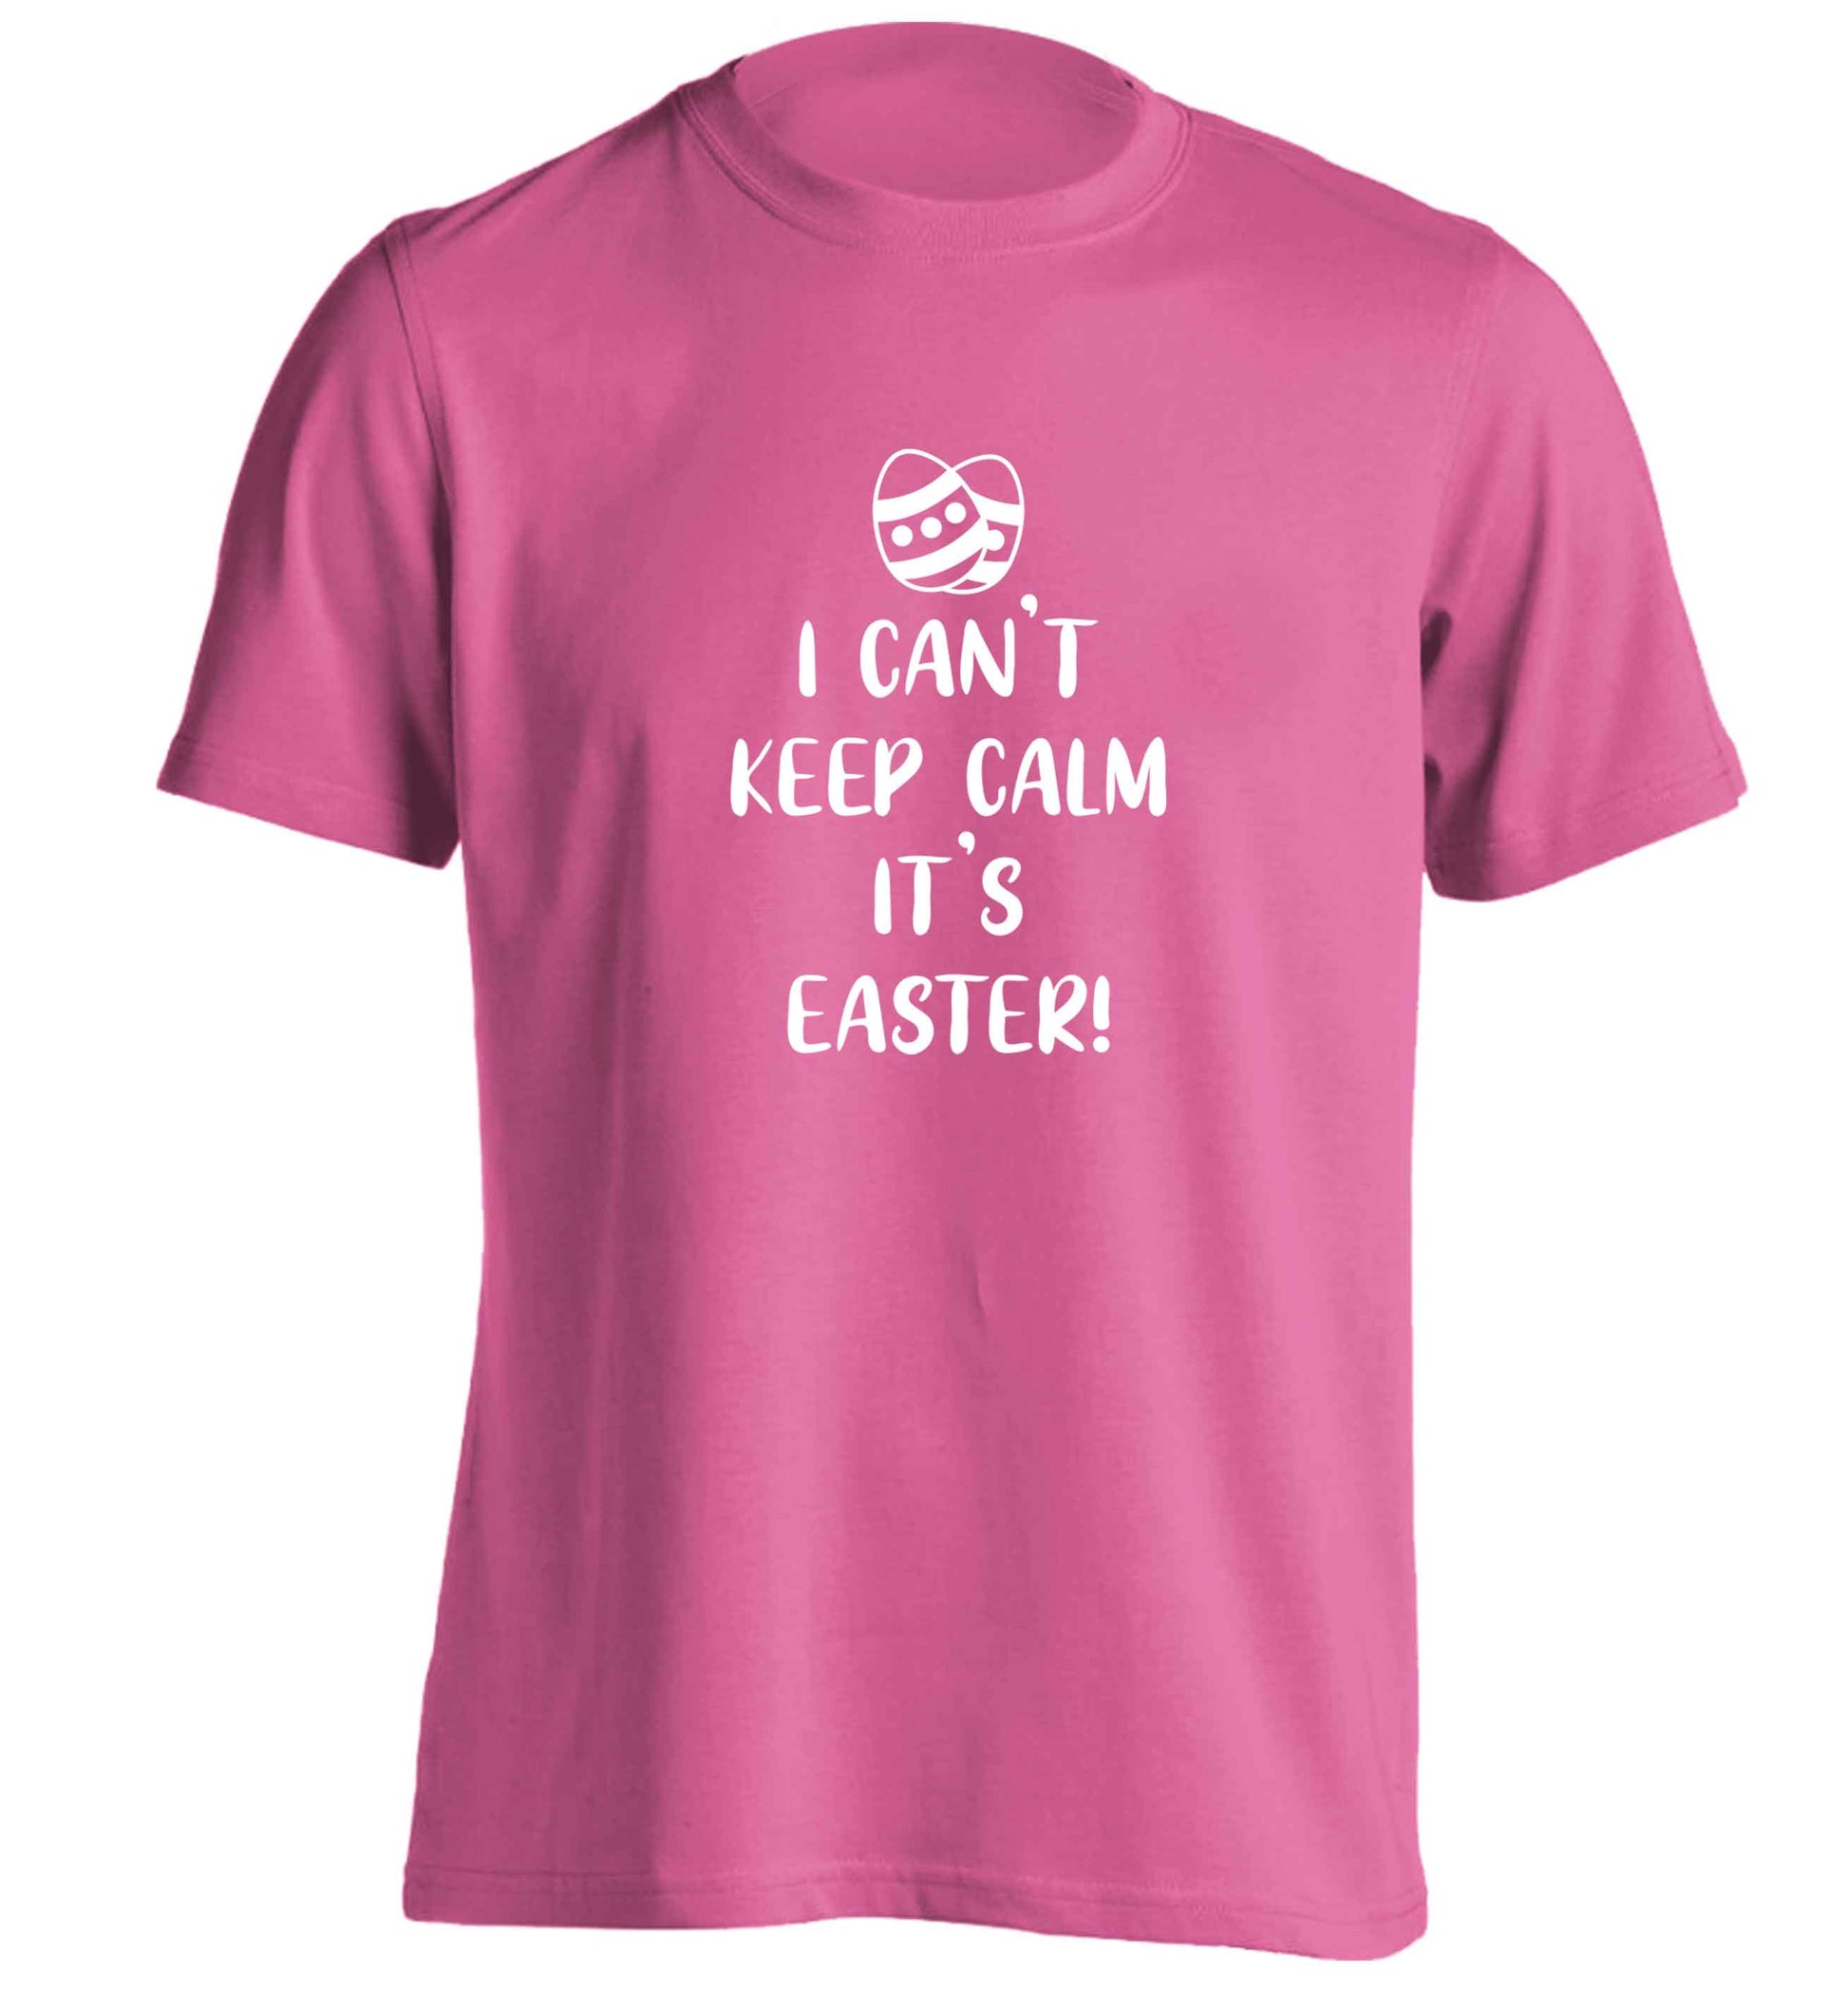 I can't keep calm it's Easter adults unisex pink Tshirt 2XL